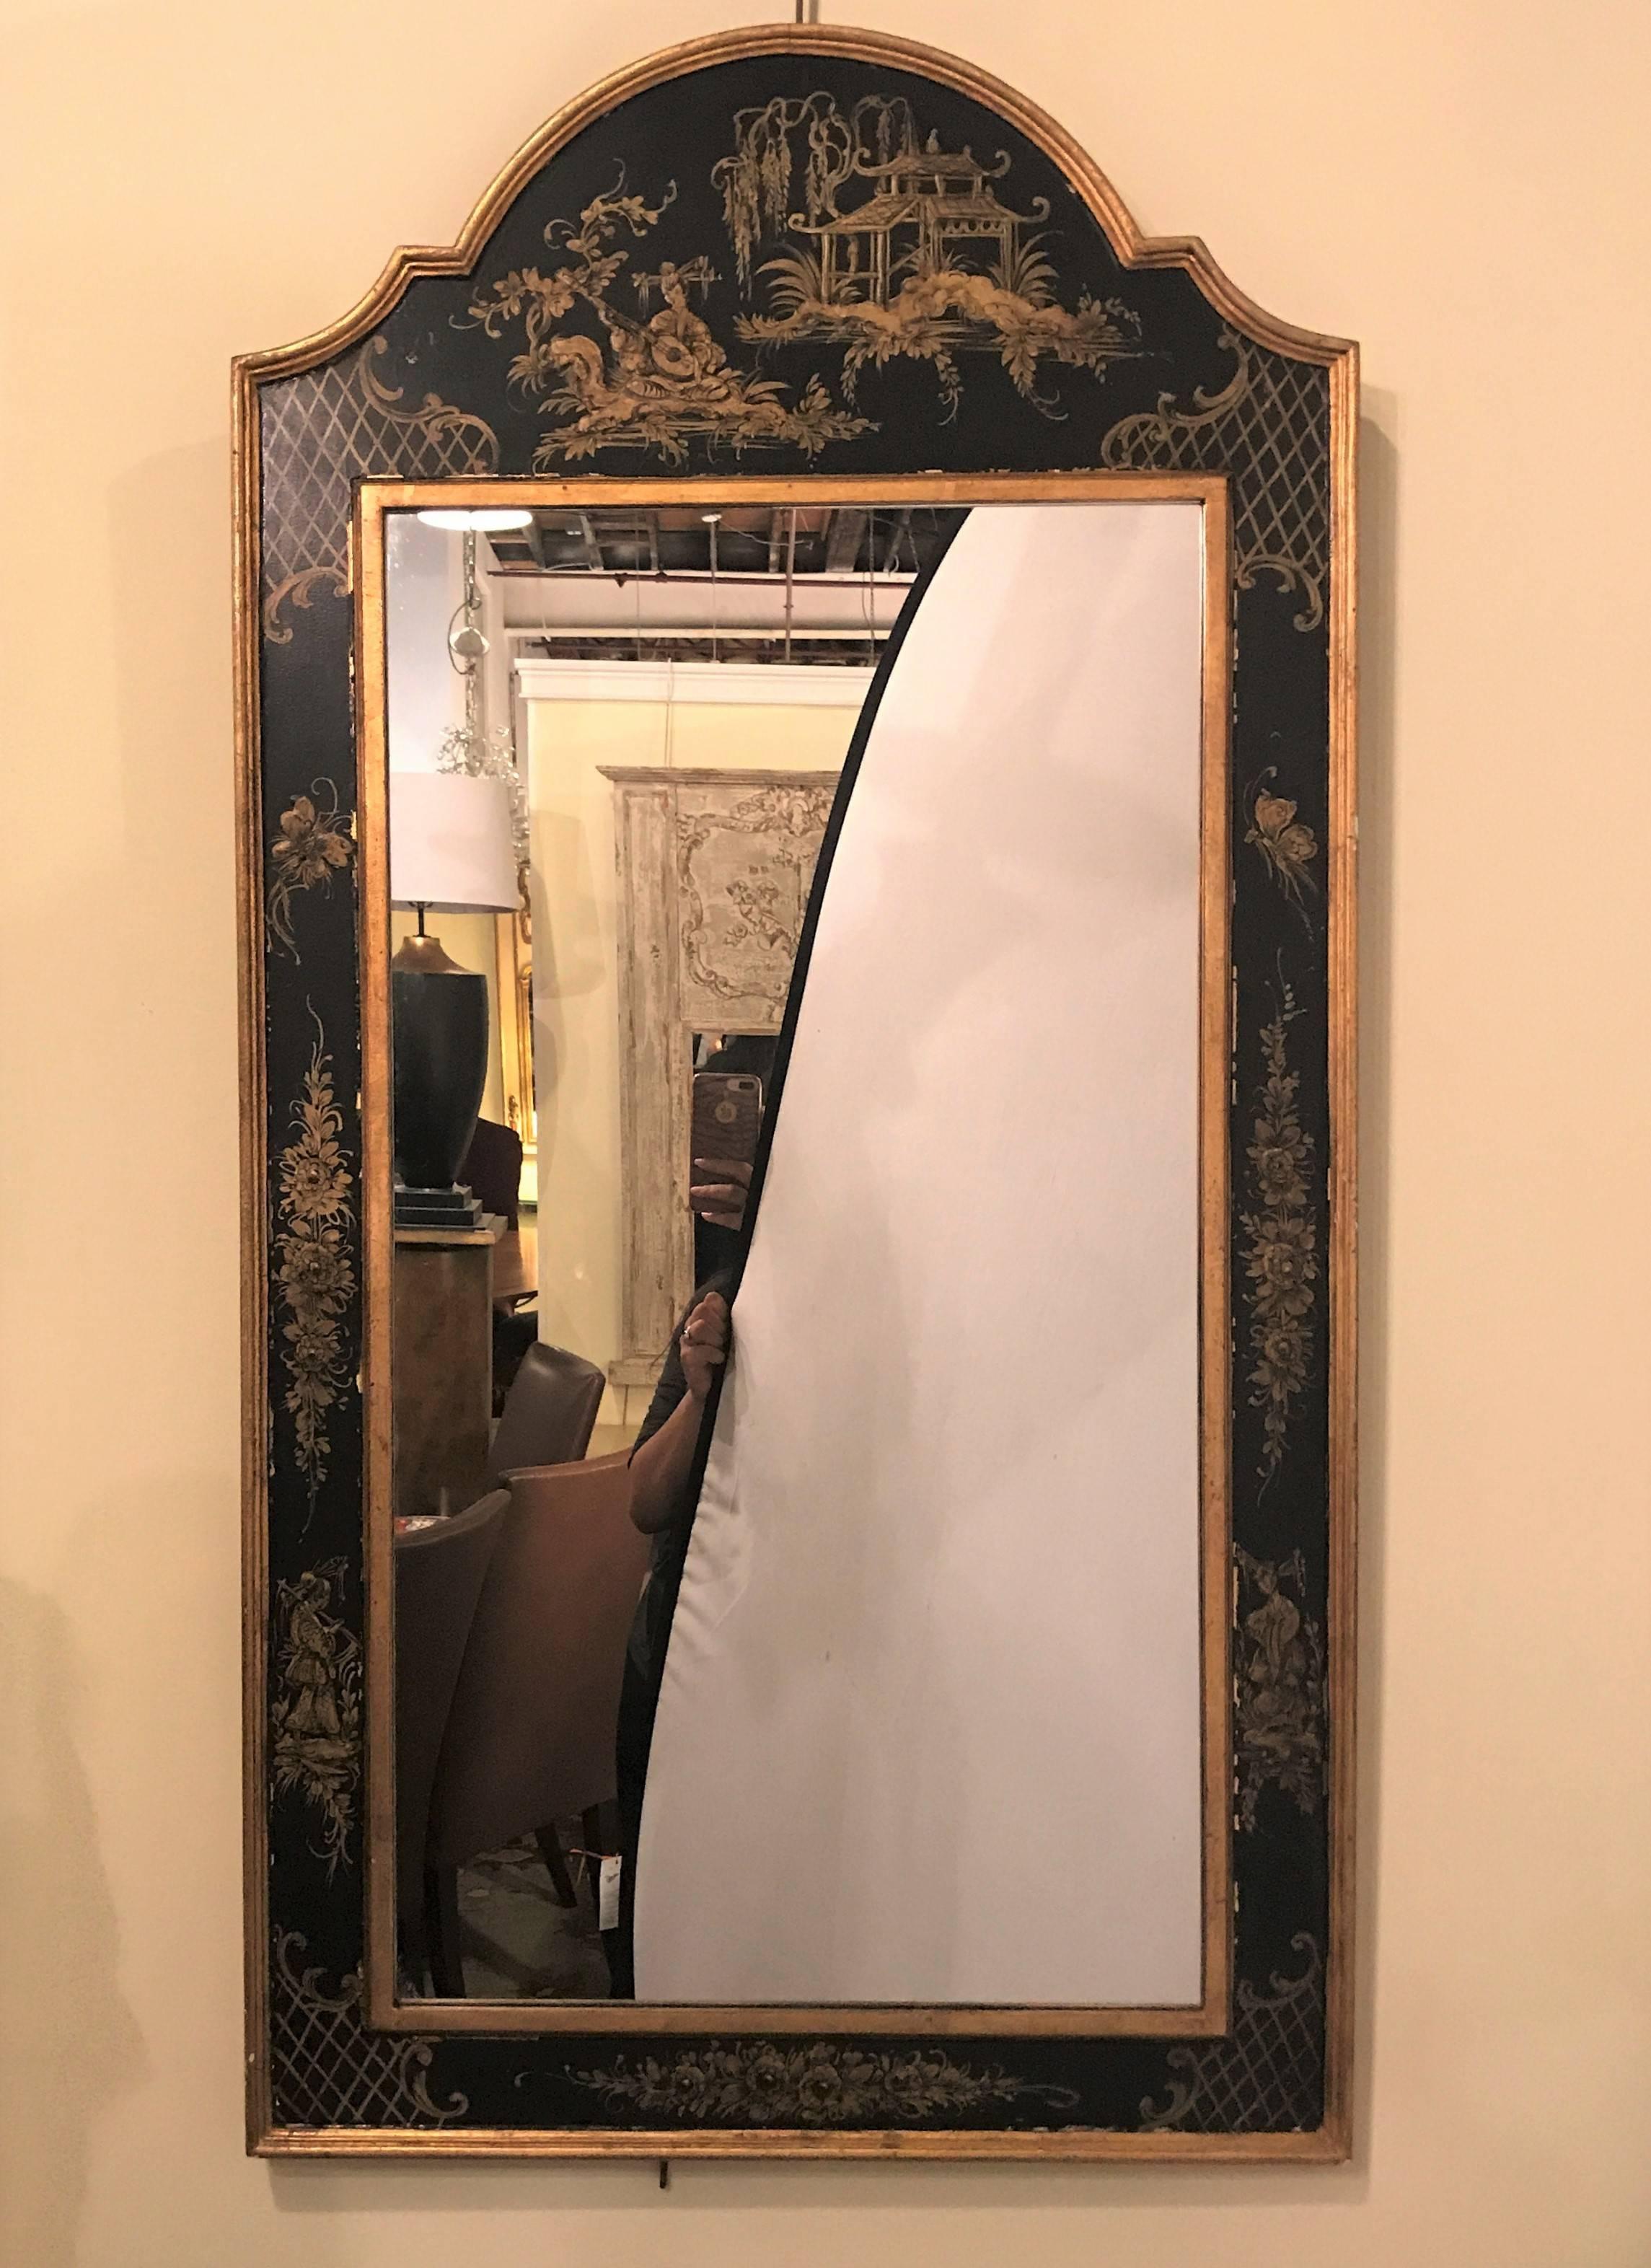 A chinoiserie ebony and gilt decorated wall or console mirror. The clean center mirror panel framed in a paint decorated ebony and gilt frame depicting a woman playing a musical instrument with a pagoda in the background. The frame itself with